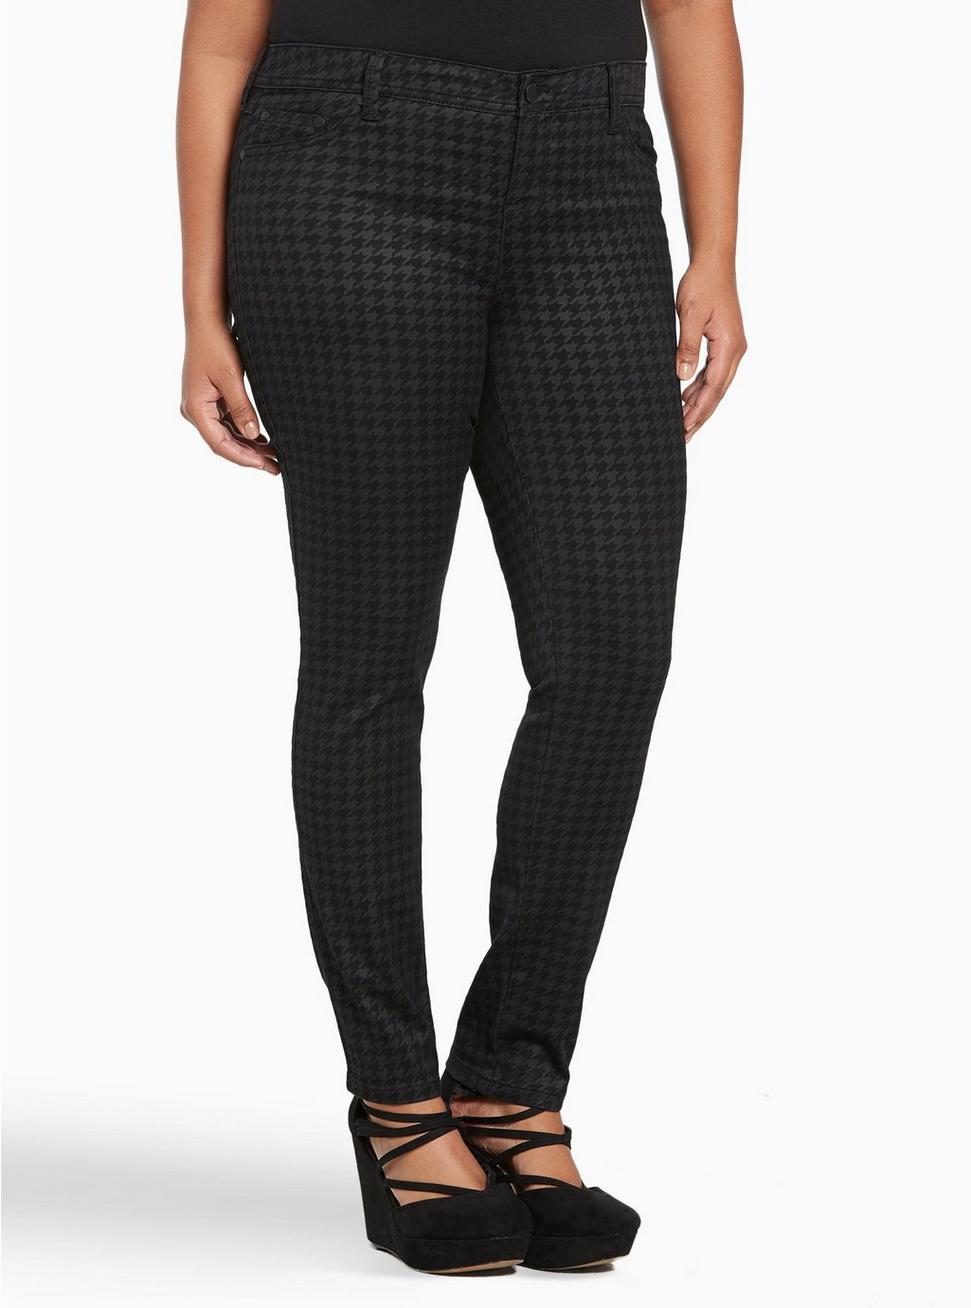 Plus Size - Luxe Stretch Skinny Pant - Houndstooth Print - Torrid